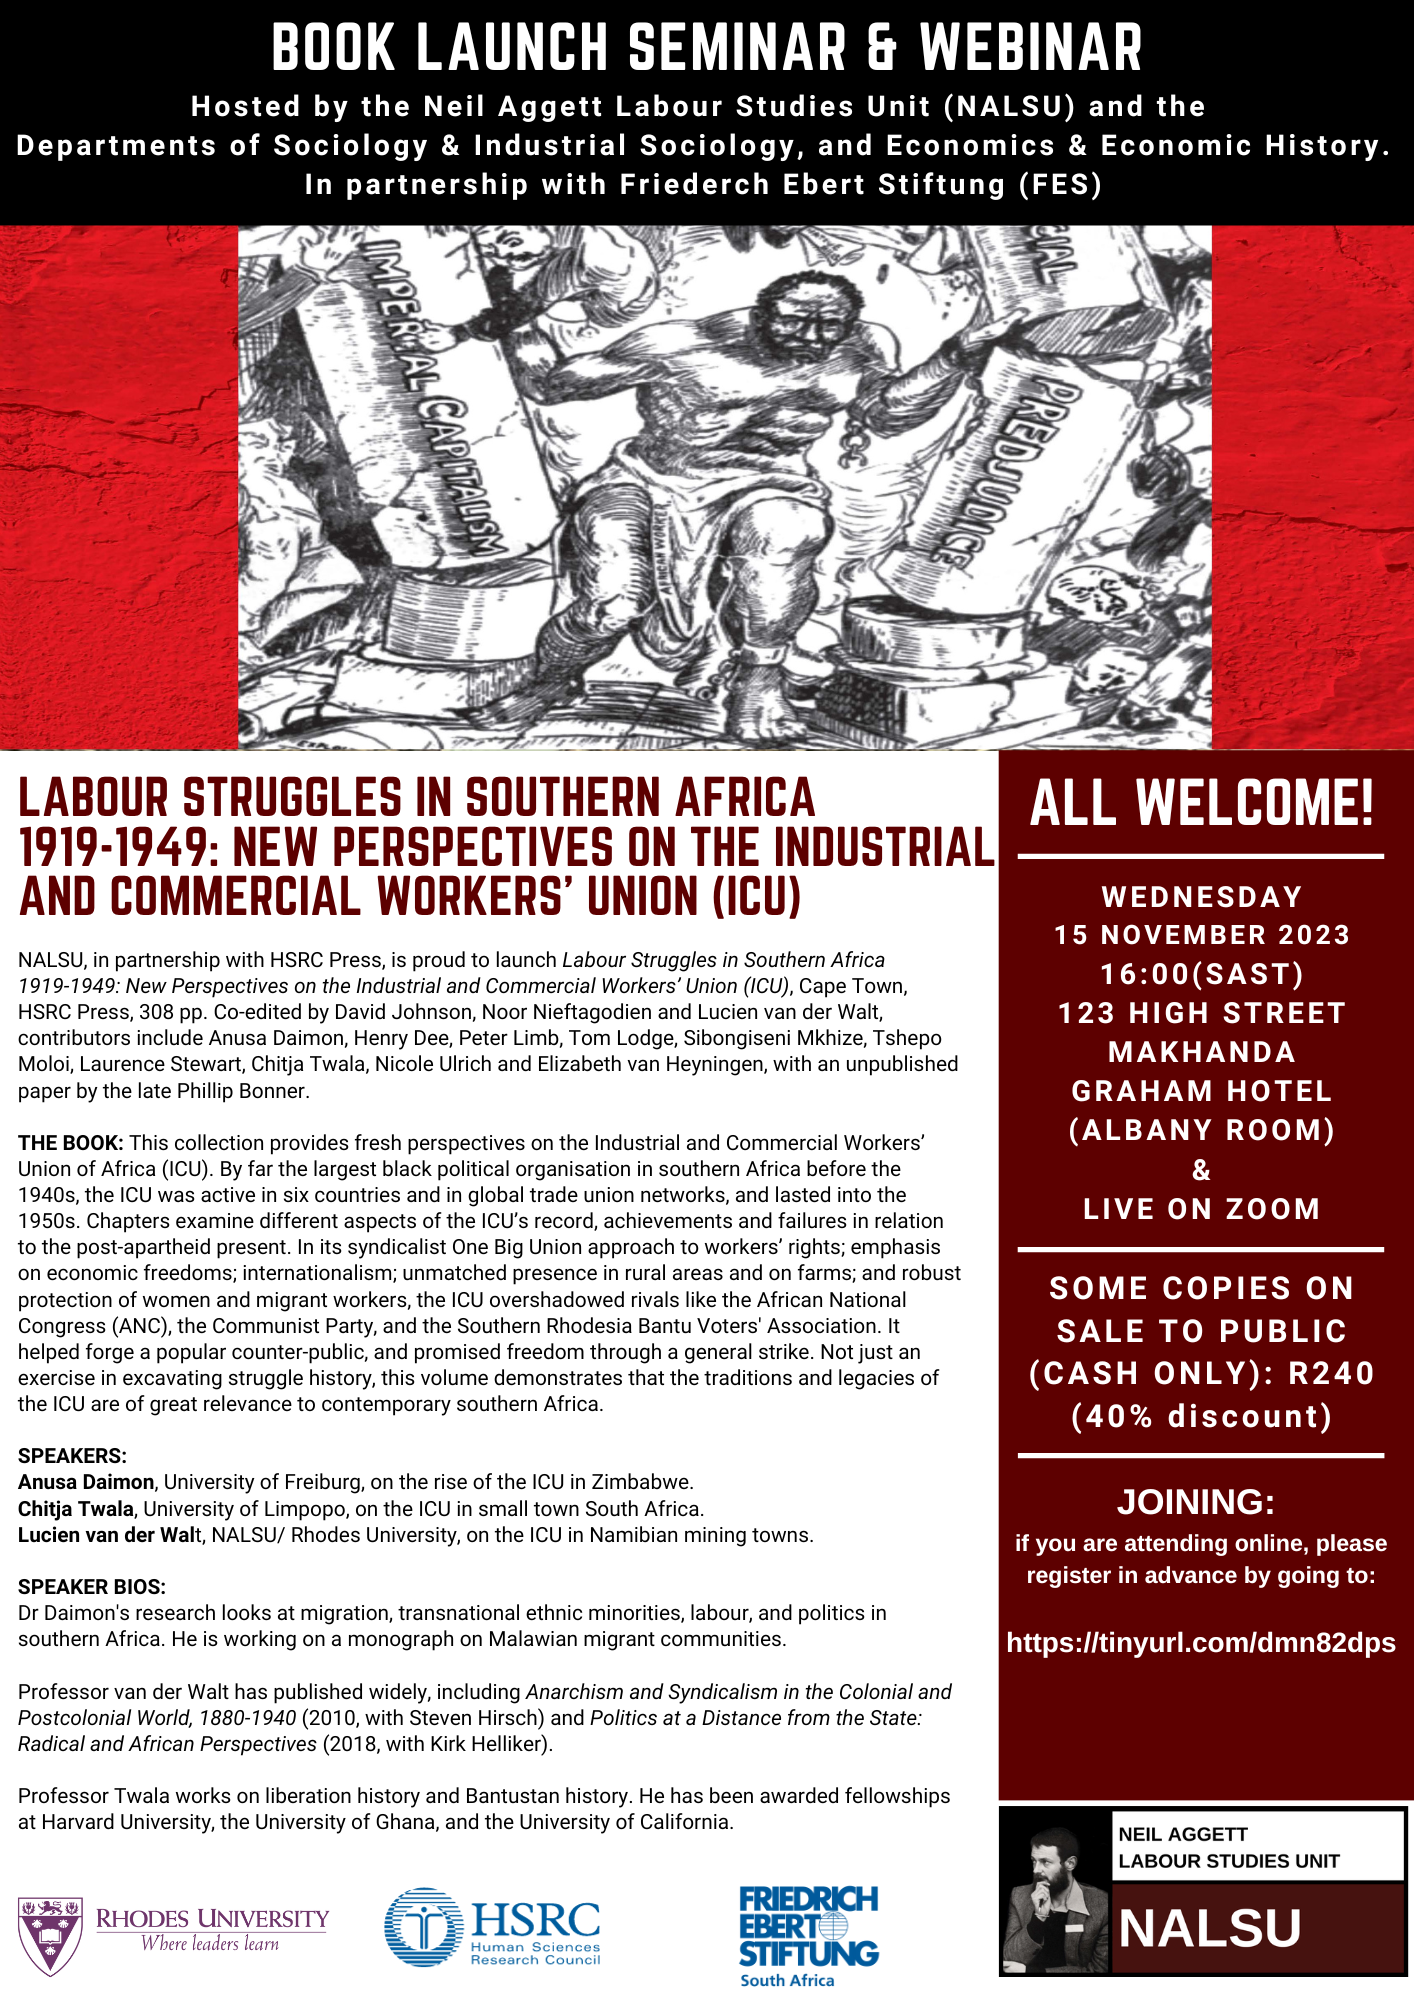 Labour Struggles in Southern Africa 1919-1949: New Perspectives on the Industrial and Commercial Workers’ Union (ICU)